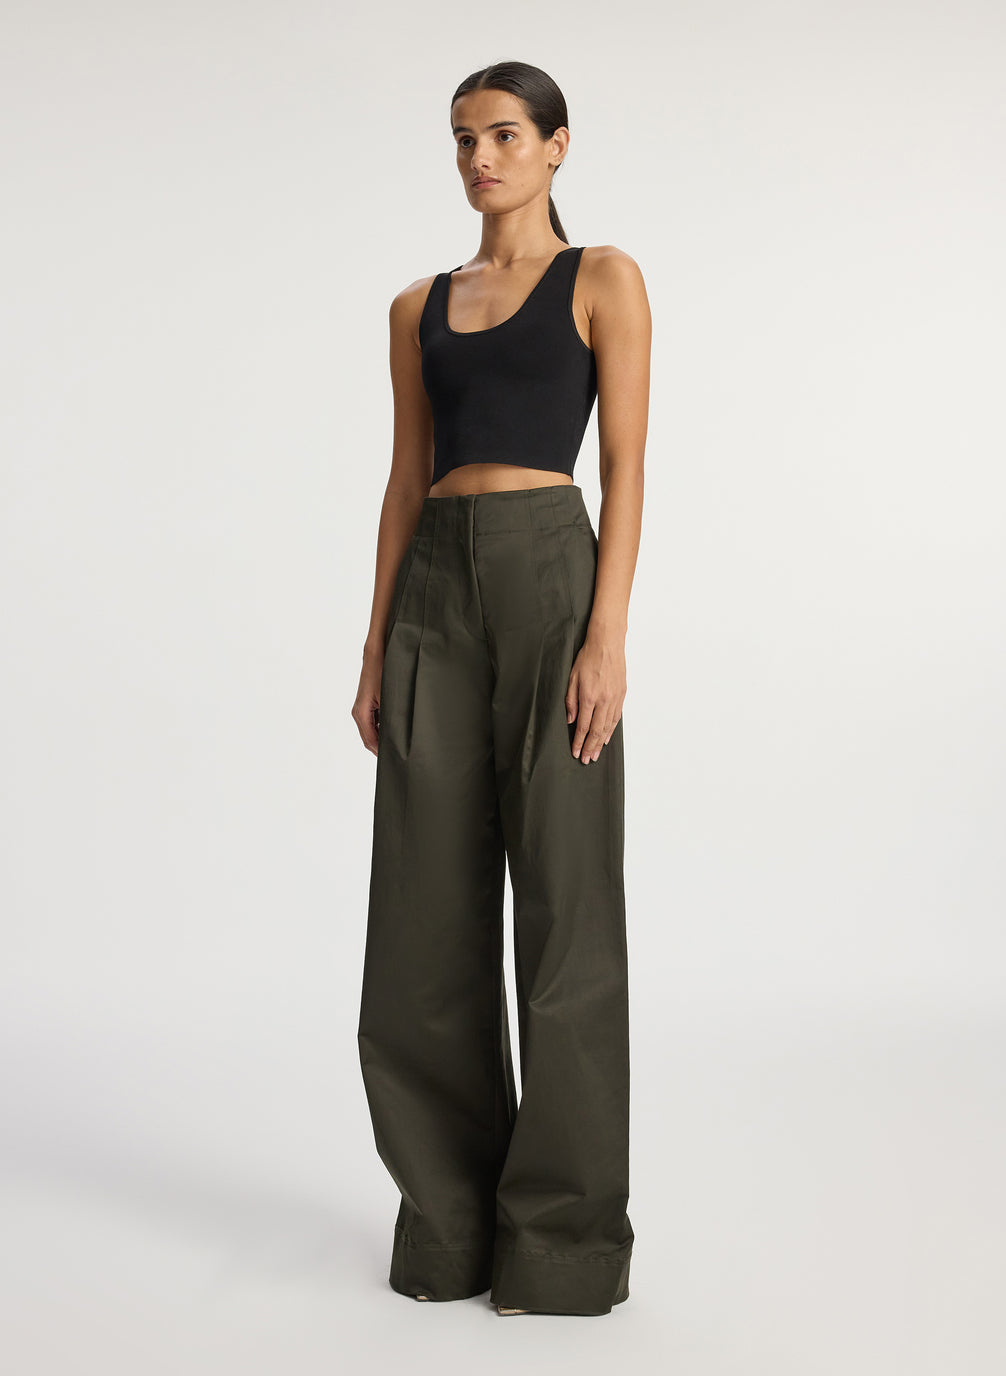 side view of woman wearing black compact knit tank top and olive green pants